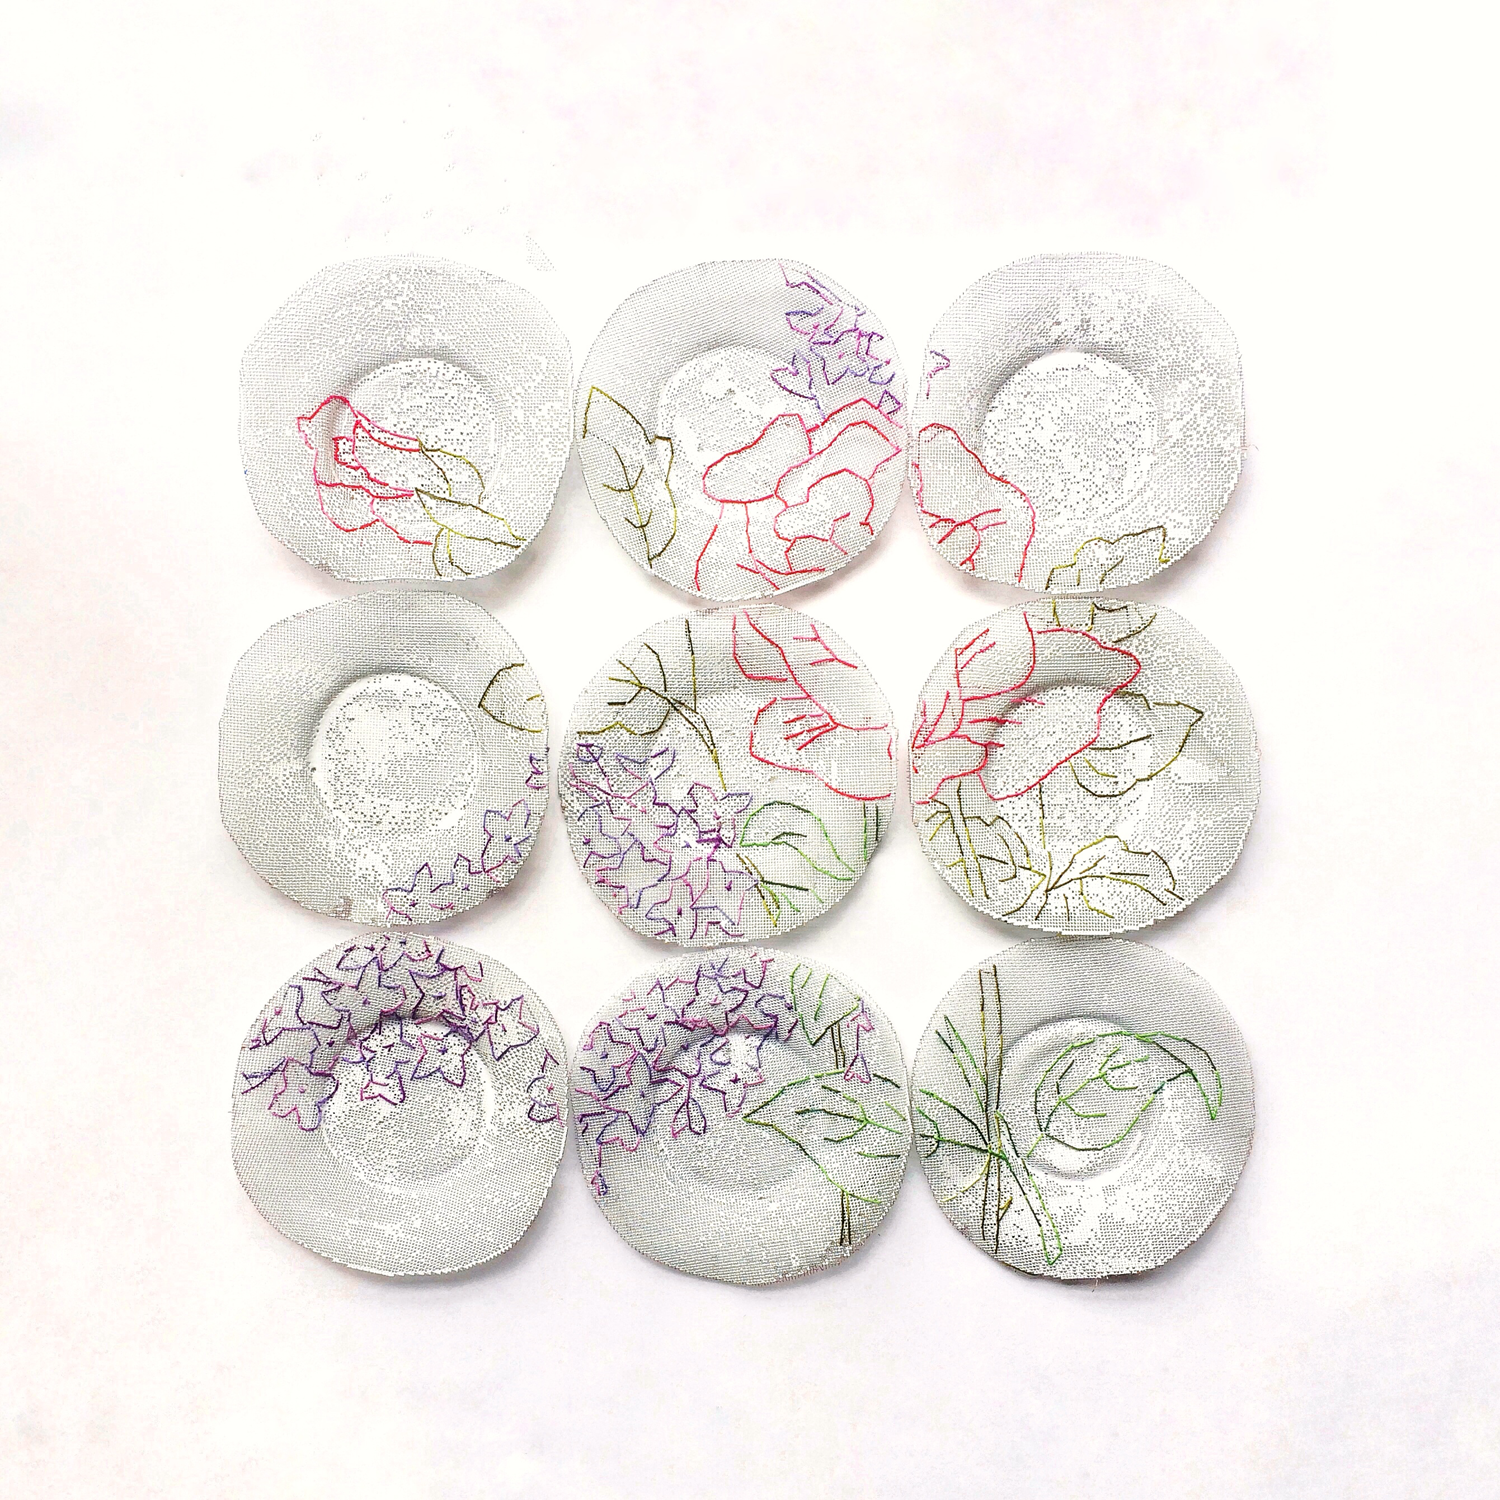 Nine enamelled copper mesh plates with stitching of flowers